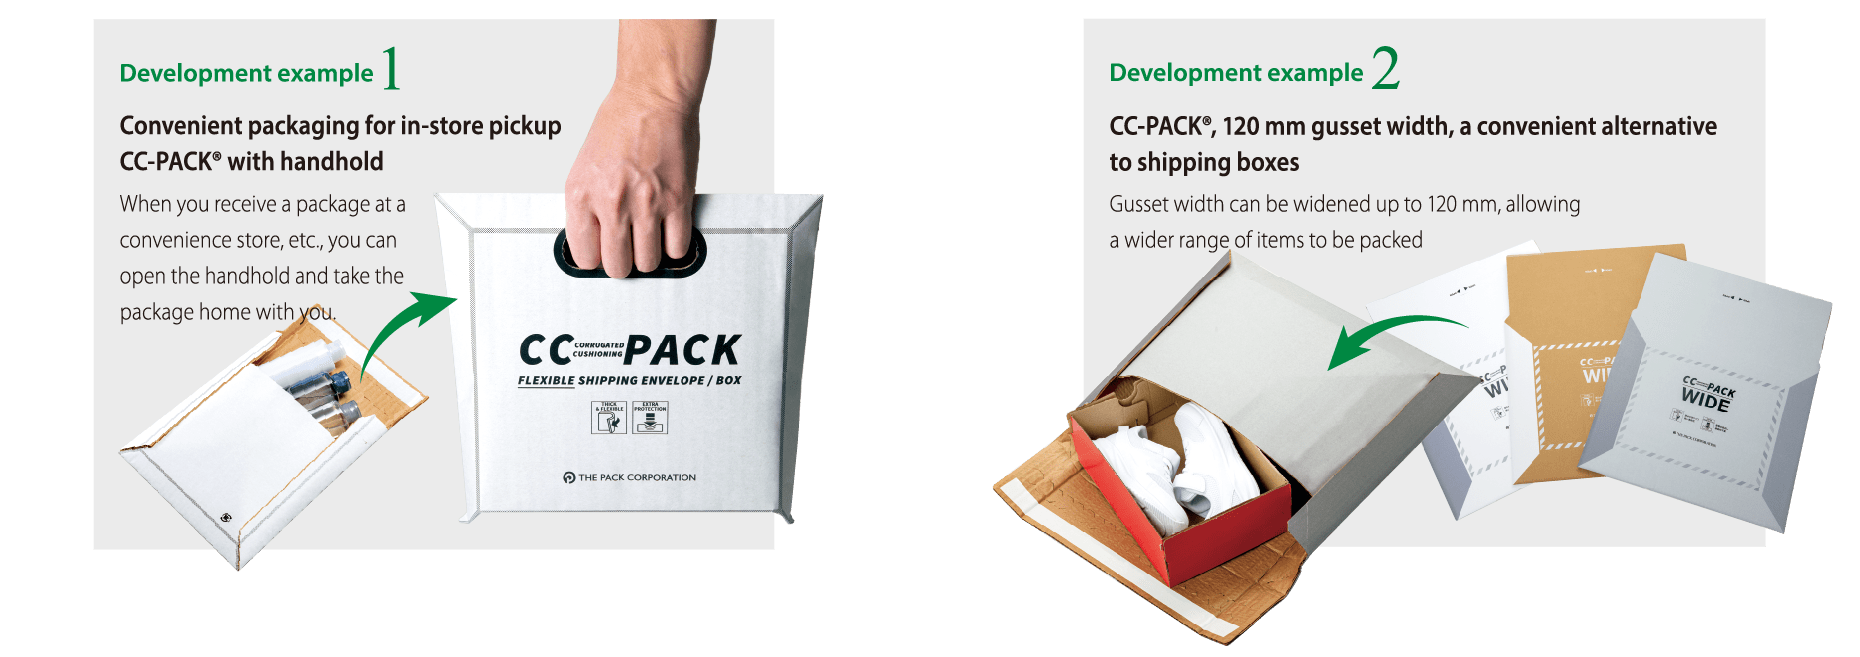 CC-PACKdevelopment example